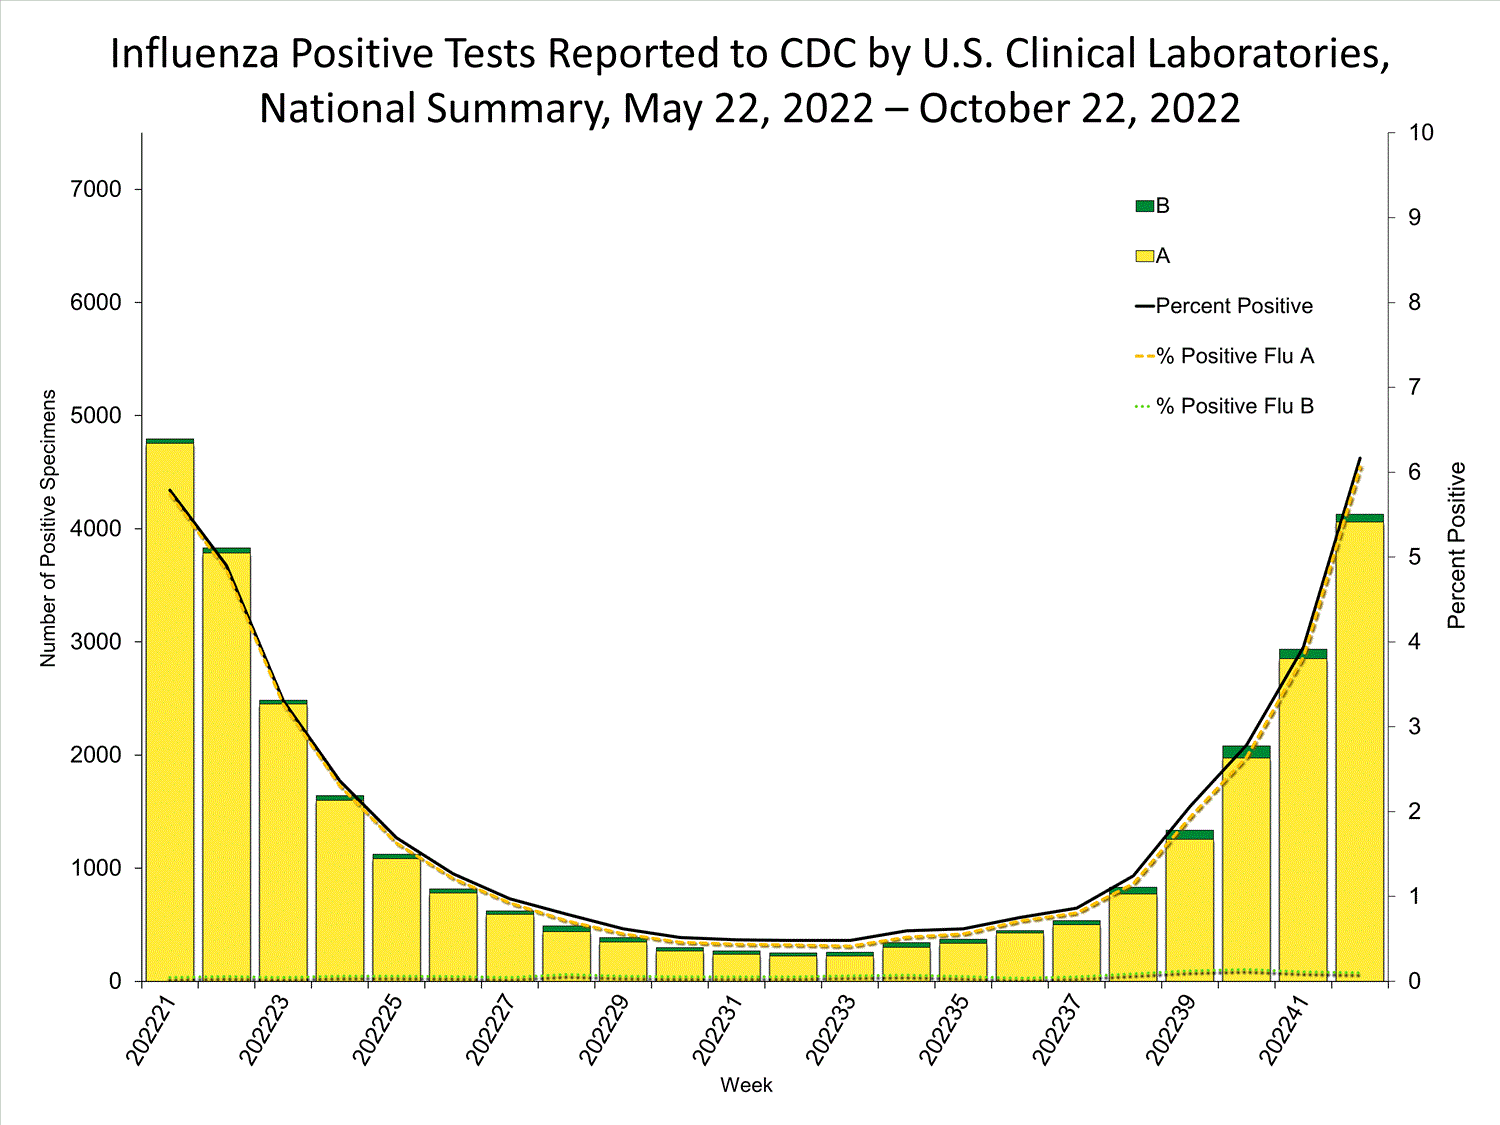 Influenza Positive Tests Reported to CDC by U.S. Clinical Laboratories, May - October 2022